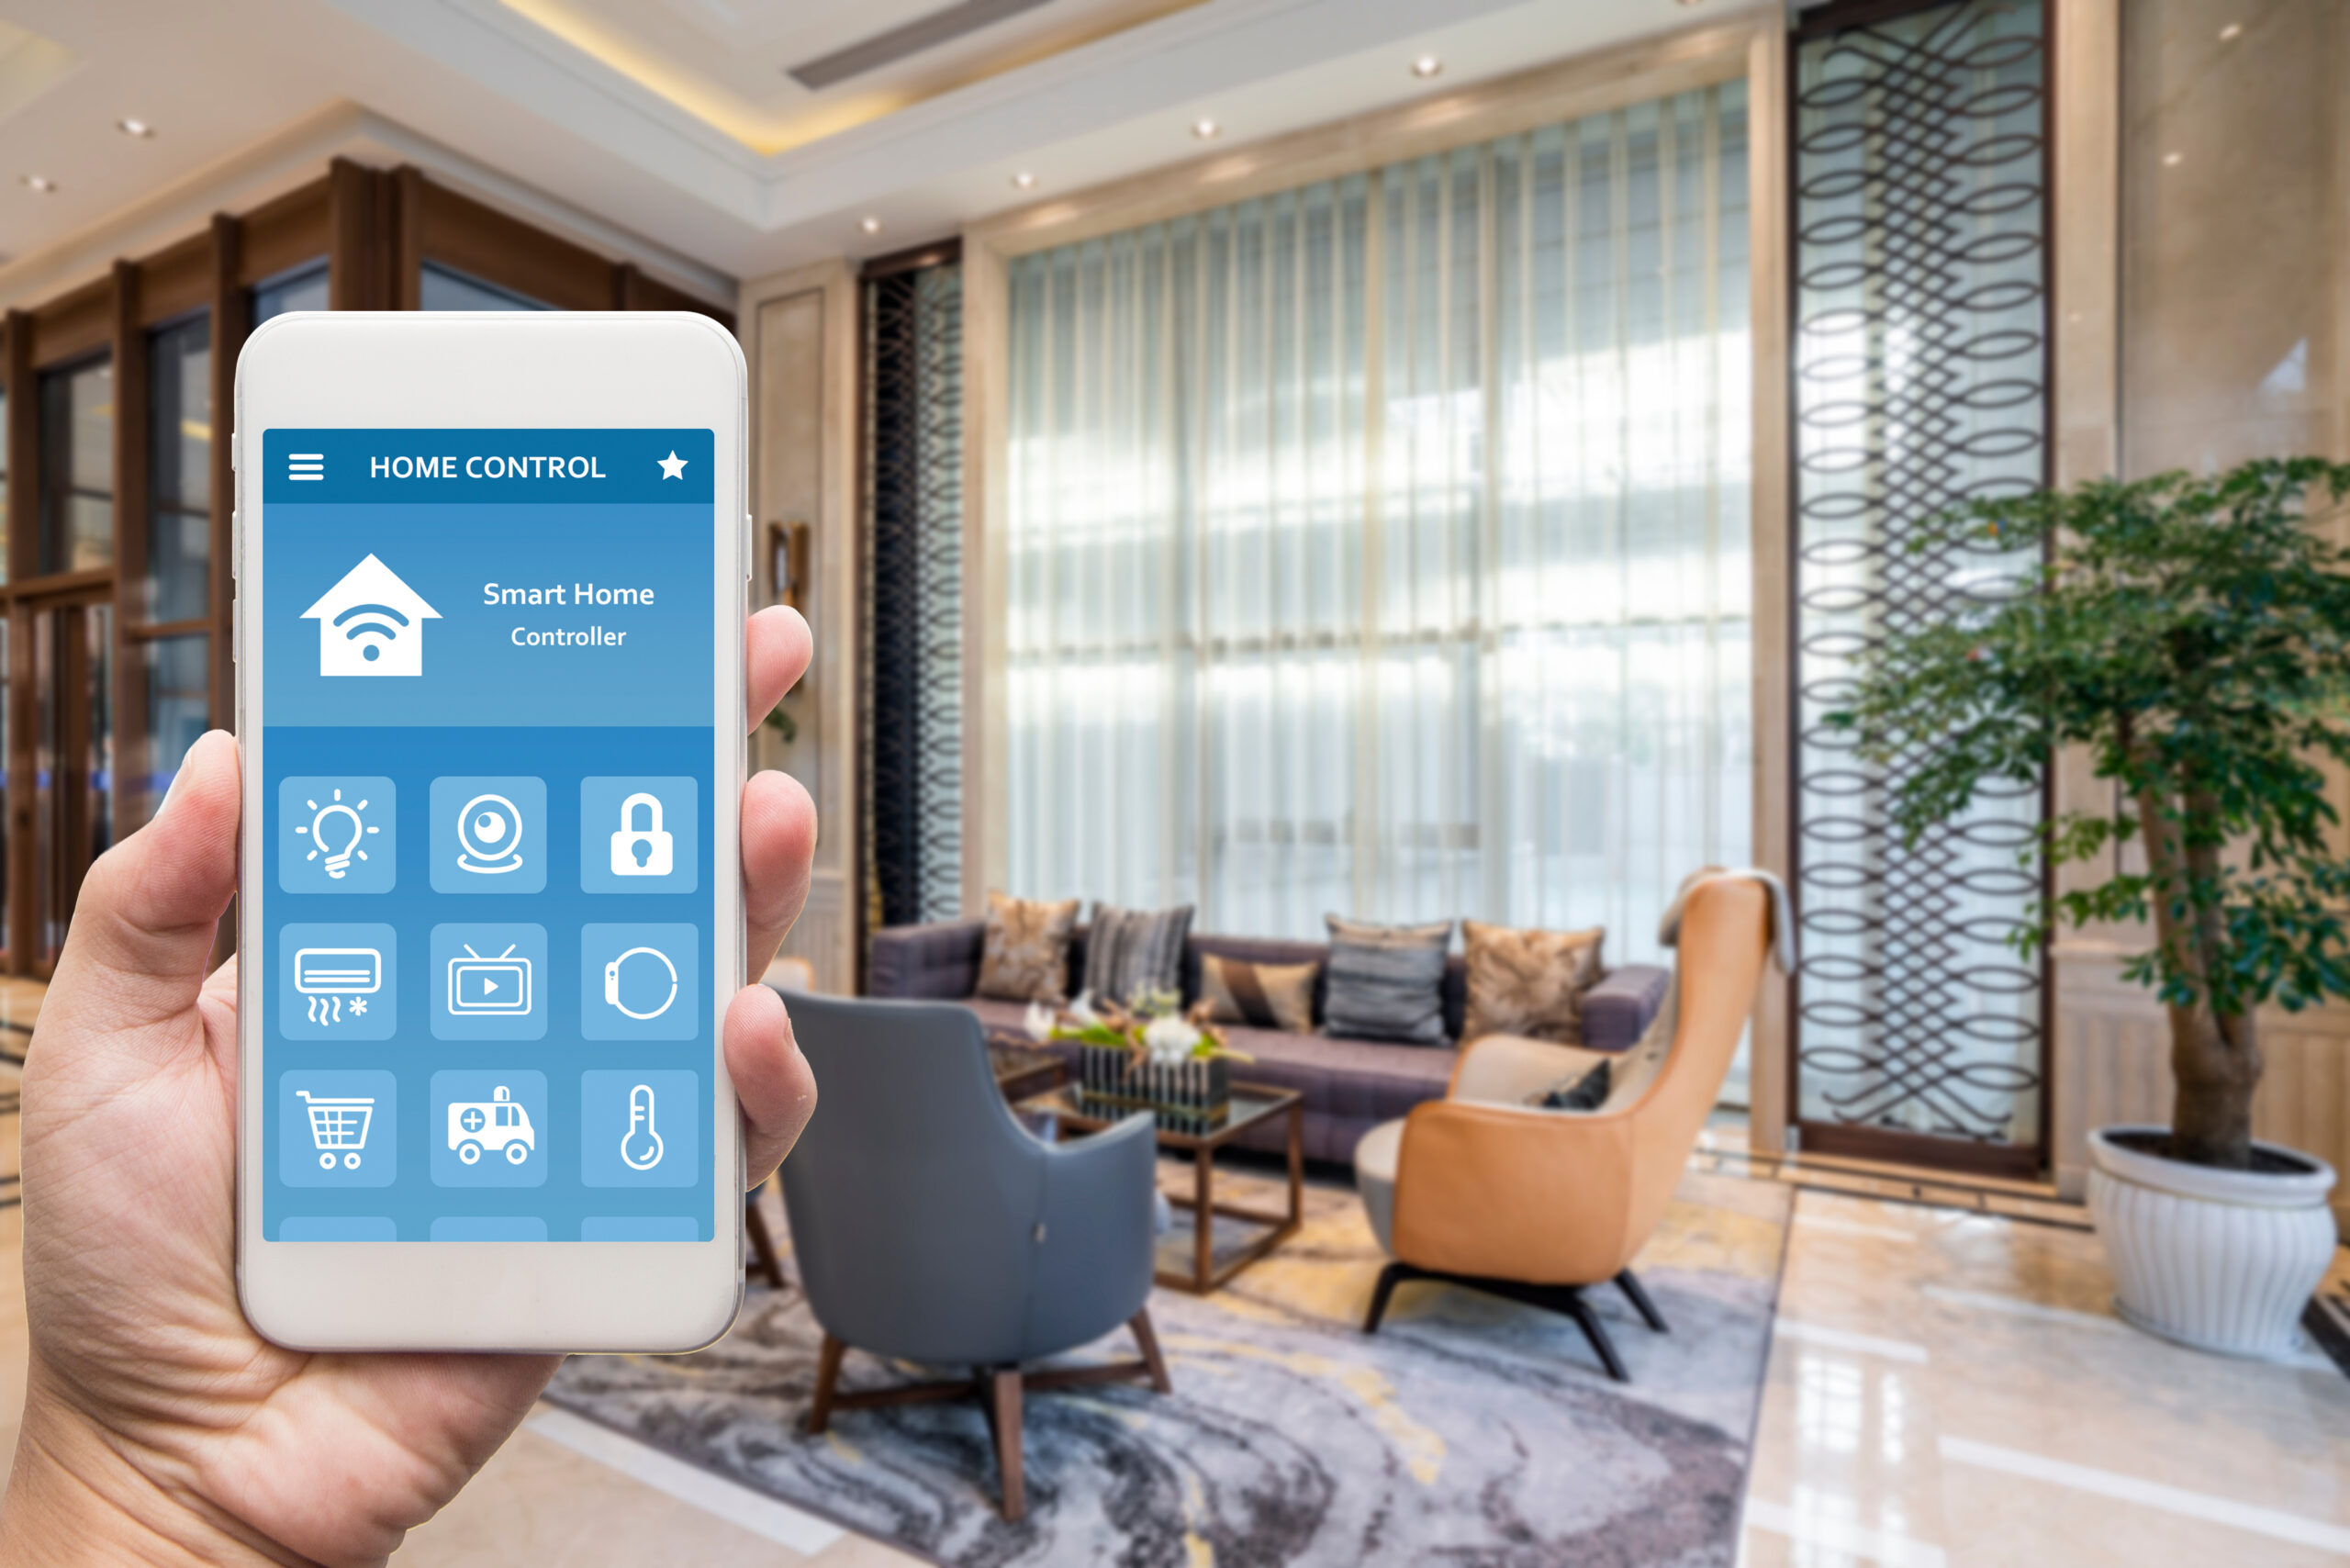 Hand holding a smartphone with smart home integration, home automation, device with app icons